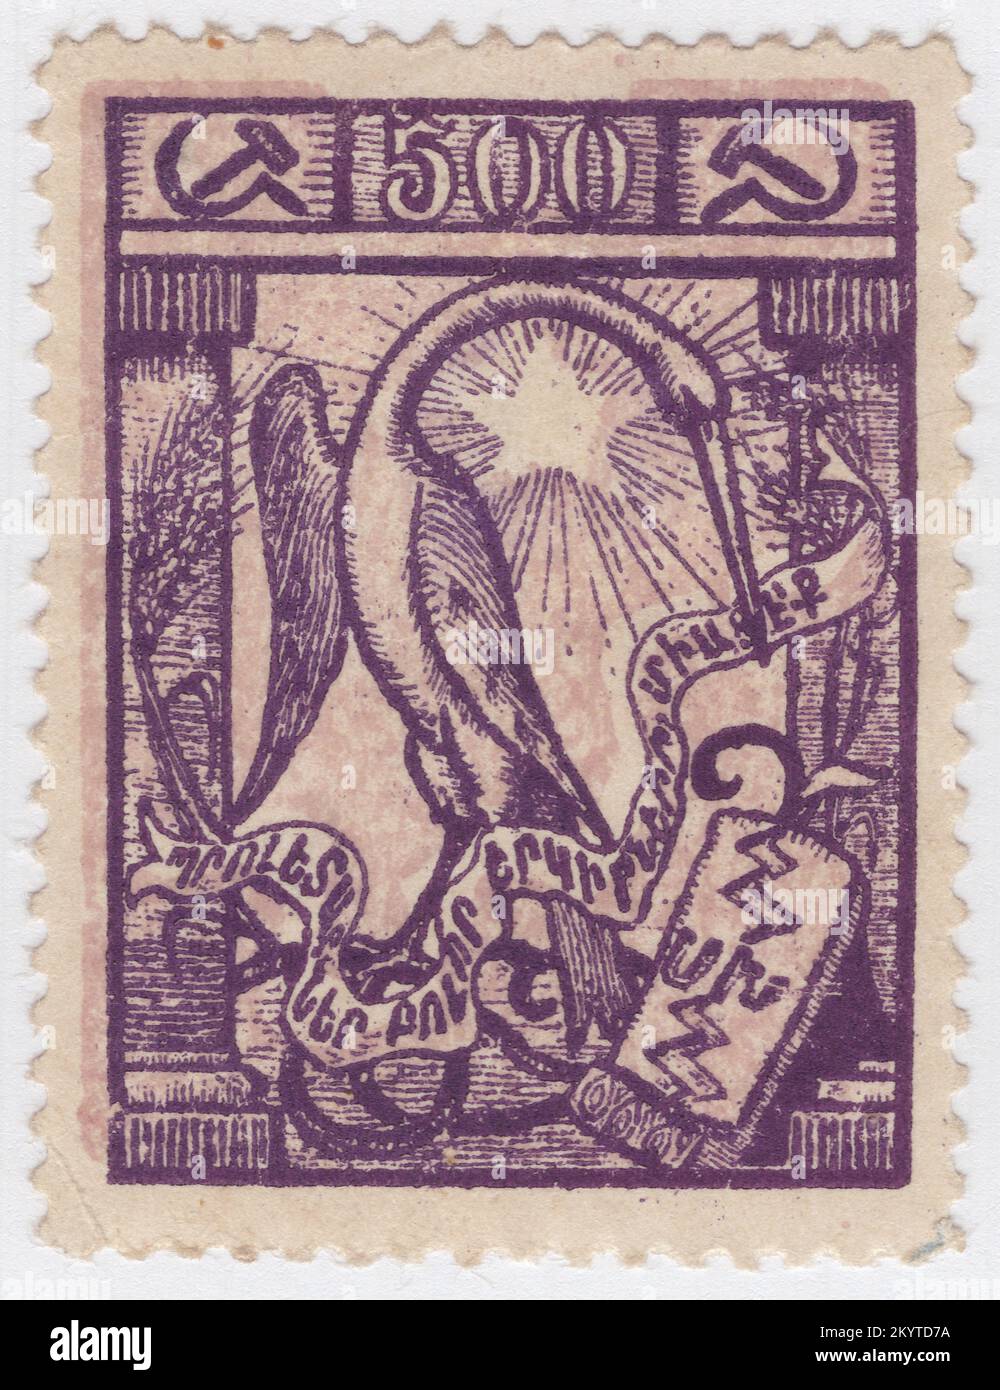 ARMENIA - 1922: An 500 rubles violet and pale lilac postage stamp depicting Crane. Officially the Republic of Armenia, is a landlocked country in the Armenian Highlands of Western Asia. It is a part of the Caucasus region; and is bordered by Turkey to the west, Georgia to the north, the Lachin corridor (under a Russian occupation force) and Azerbaijan to the east, and Iran and the Azerbaijani exclave of Nakhchivan to the south. Yerevan is the capital, largest city and the financial center. Armenia is a unitary, multi-party, democratic nation-state with an ancient cultural heritage Stock Photo